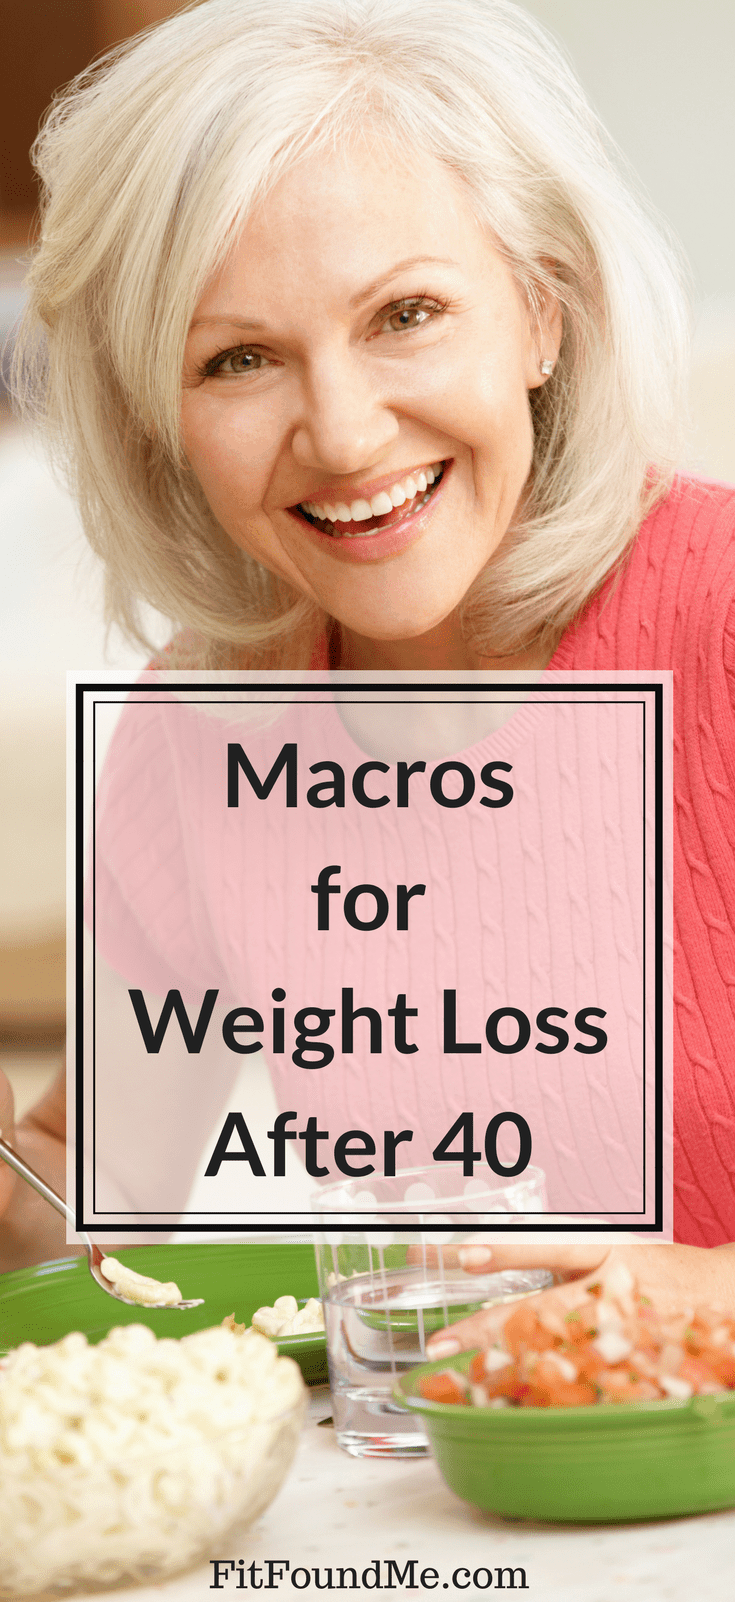 woman happily eating while counting macros losing weight